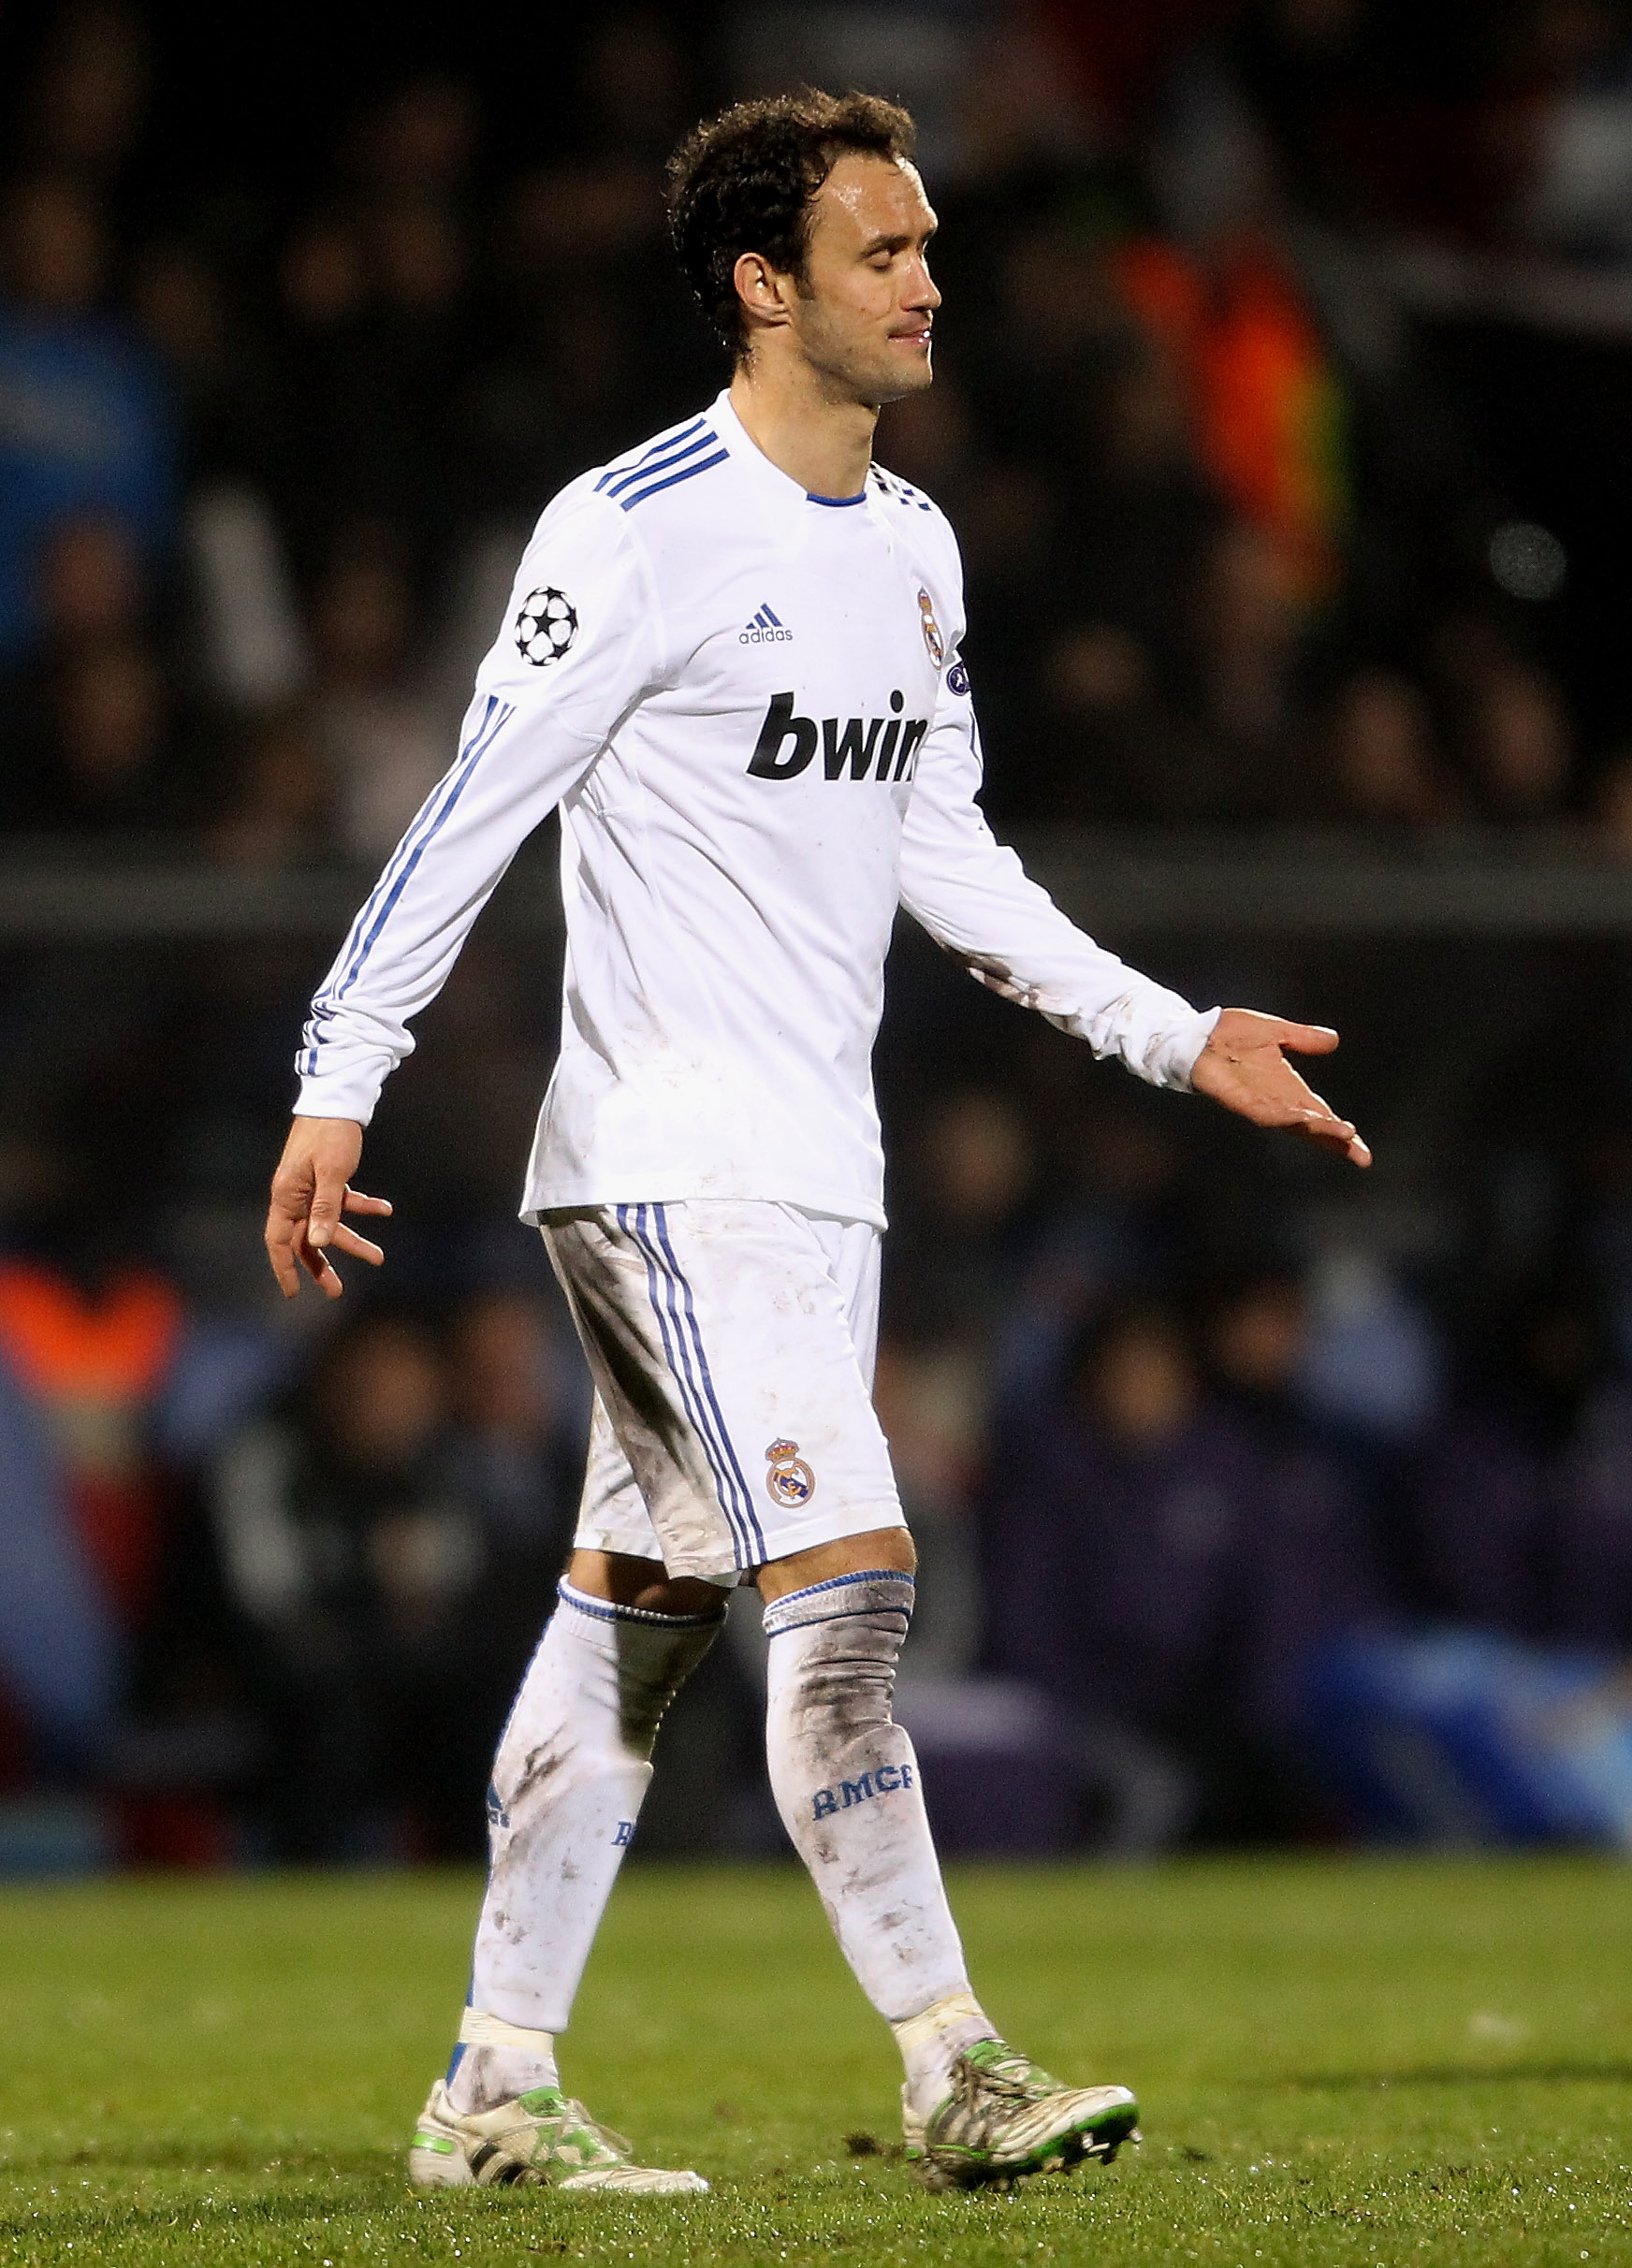 LYON, FRANCE - FEBRUARY 22:  Ricardo Carvalho of Real Madrid looks dejected during the Champions League match between Lyon and Real Madrid at Stade Gerland on February 22, 2011 in Lyon, France.  (Photo by Scott Heavey/Getty Images)